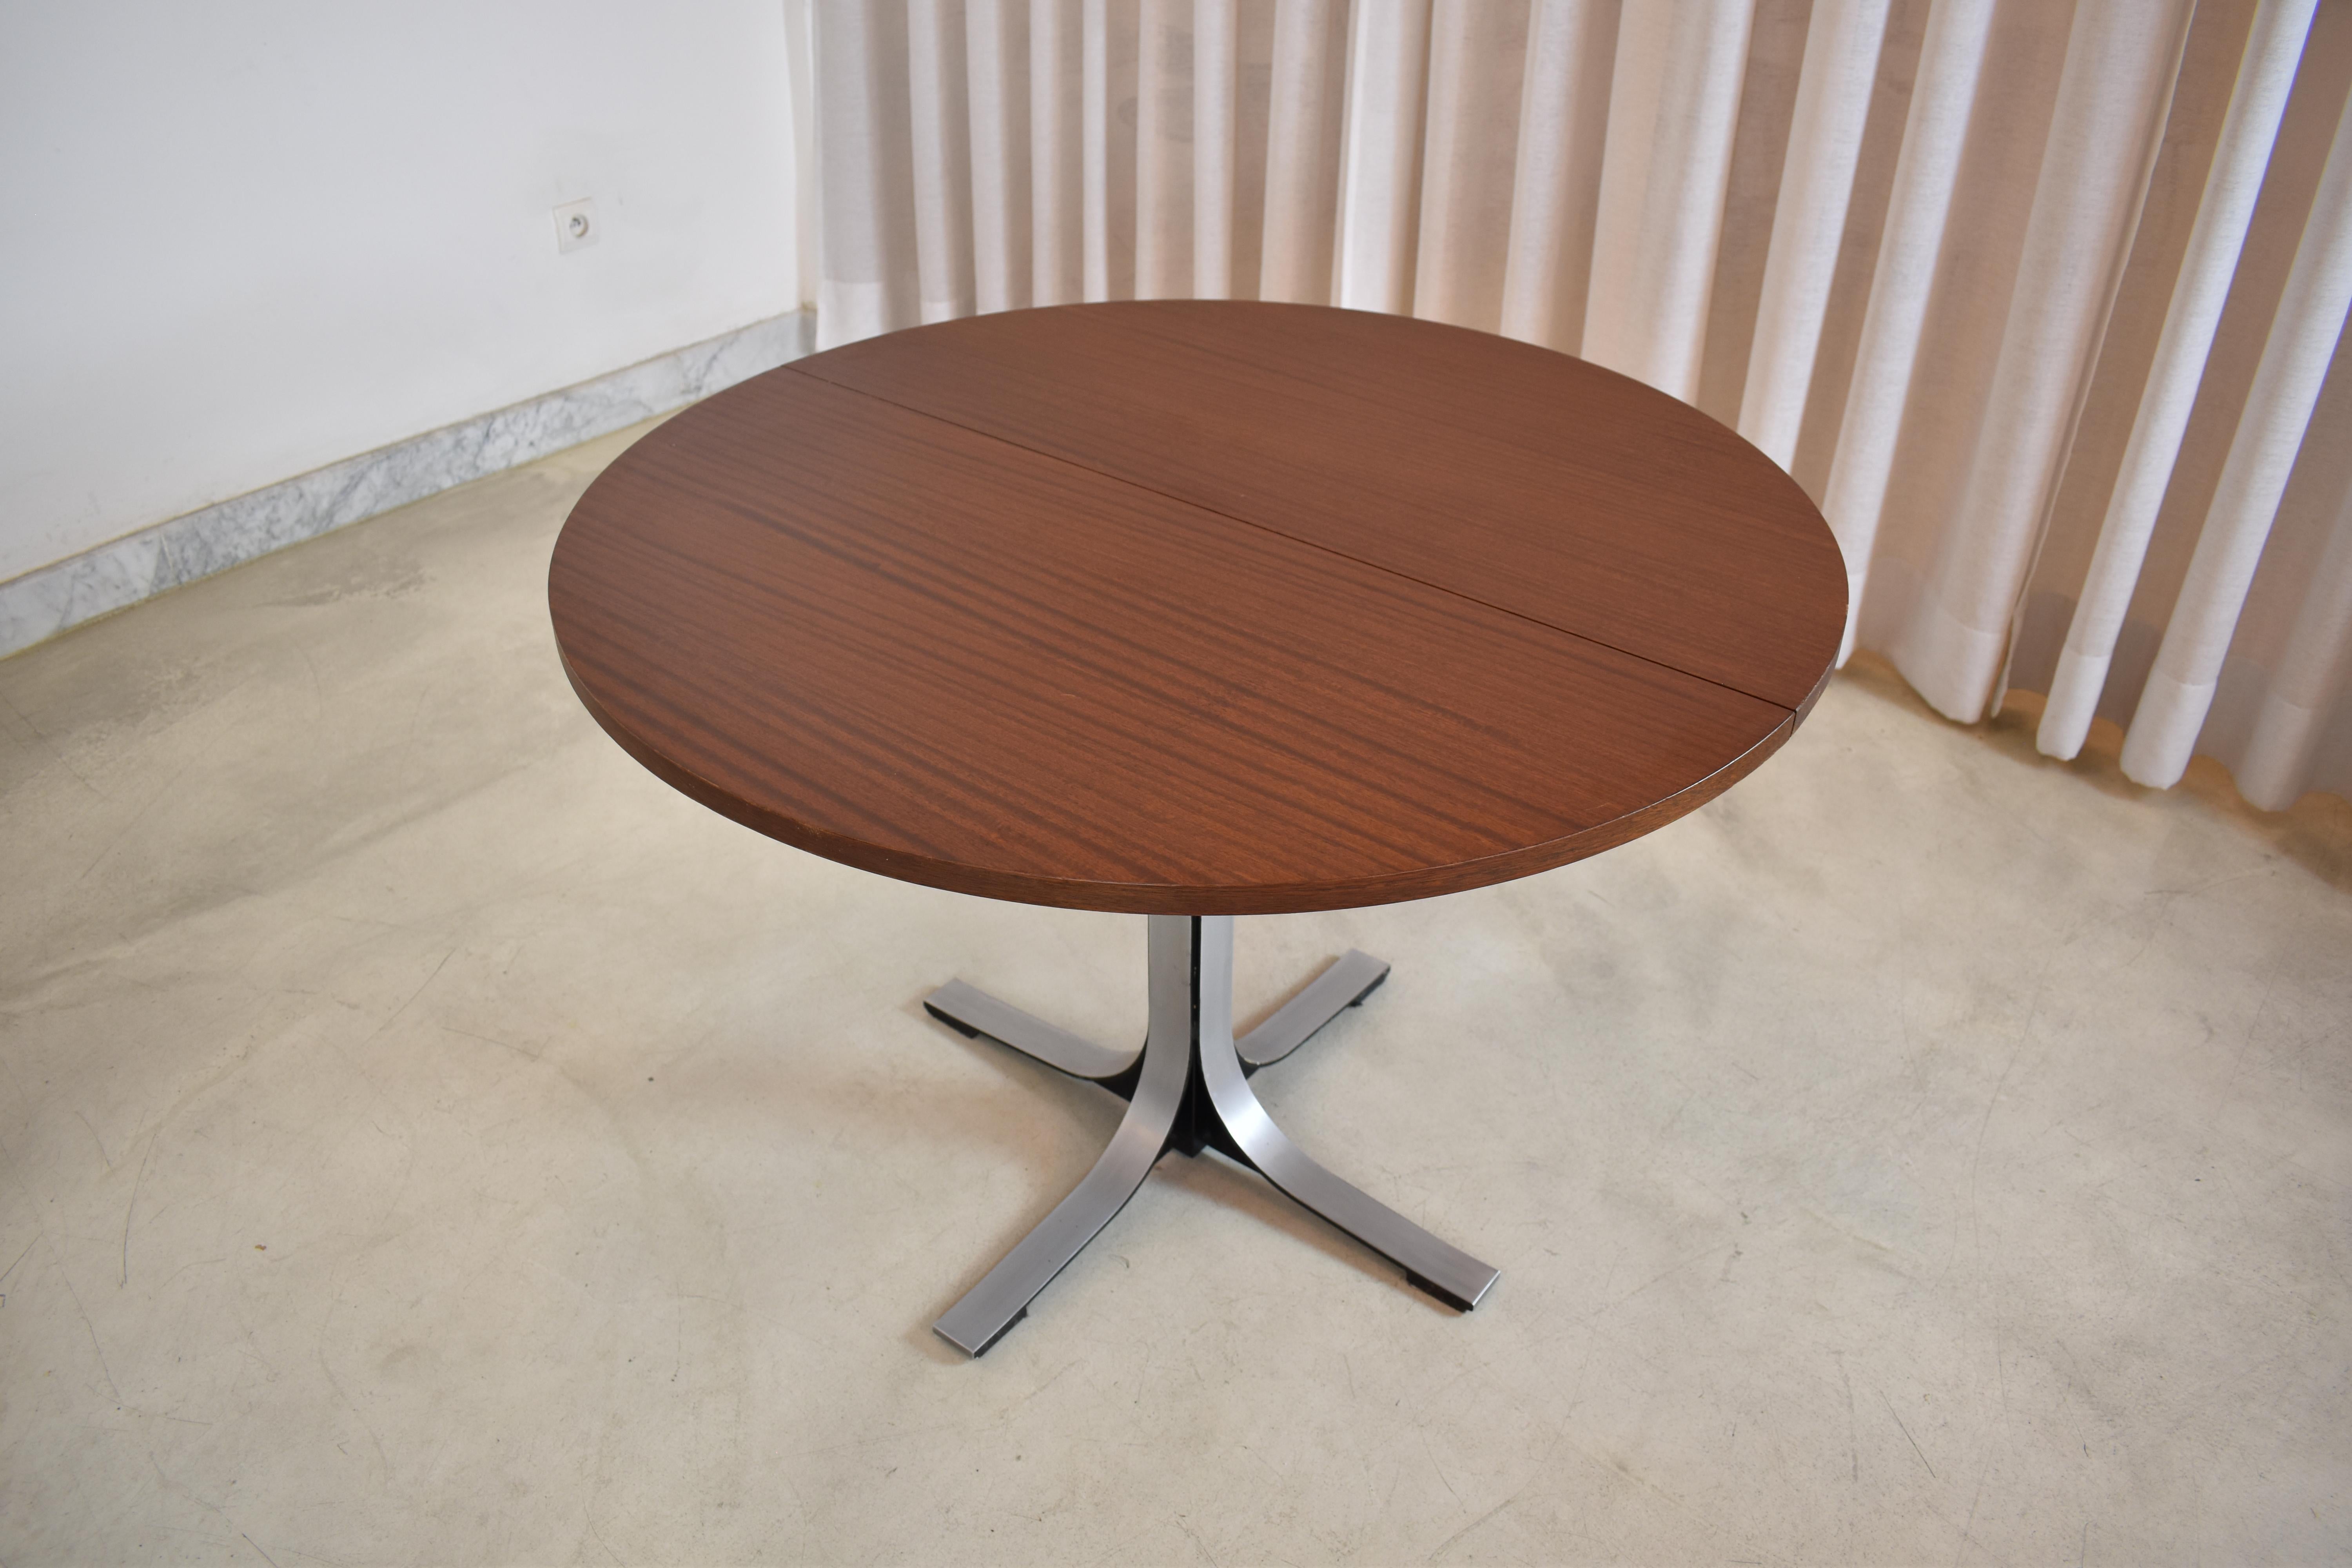 The Osvaldo Borsani by Tecno transformable walnut table manufactured in the 1960s, embodies his signature blend of sleek design and functionality by transitioning from a low coffee table to a high dining table. 

Its Scandinavian-inspired aesthetic